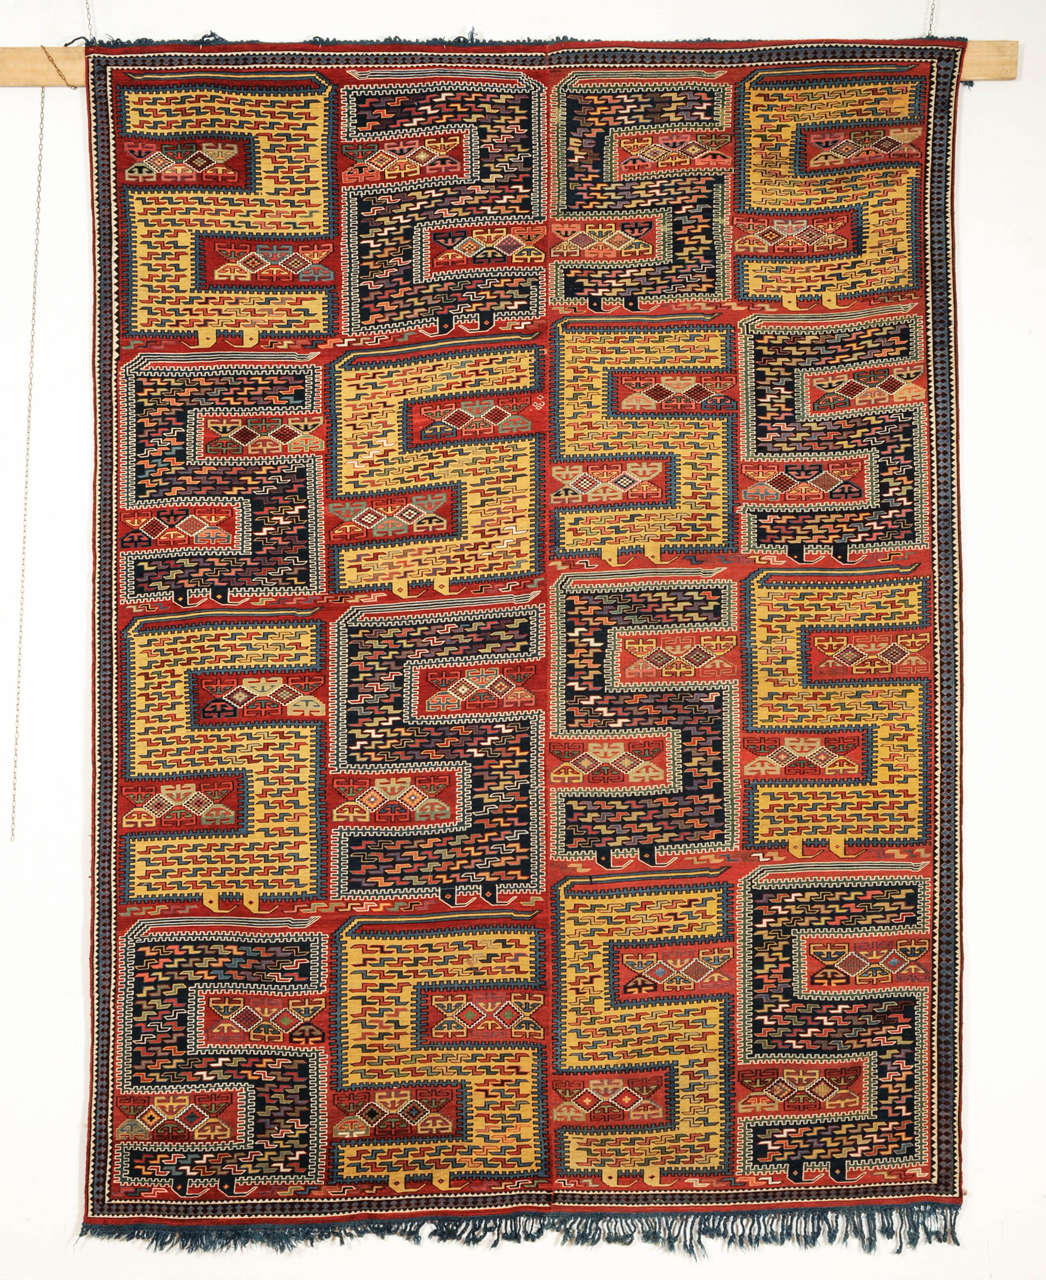 An antique Caucasian Sileh flat-woven carpet, embroidered in the 'Sumak' technique, distinguished by an all-over pattern of large, stylized dragon motifs. What makes this piece rather unique is the use of a brilliant yellow instead of ivory for the